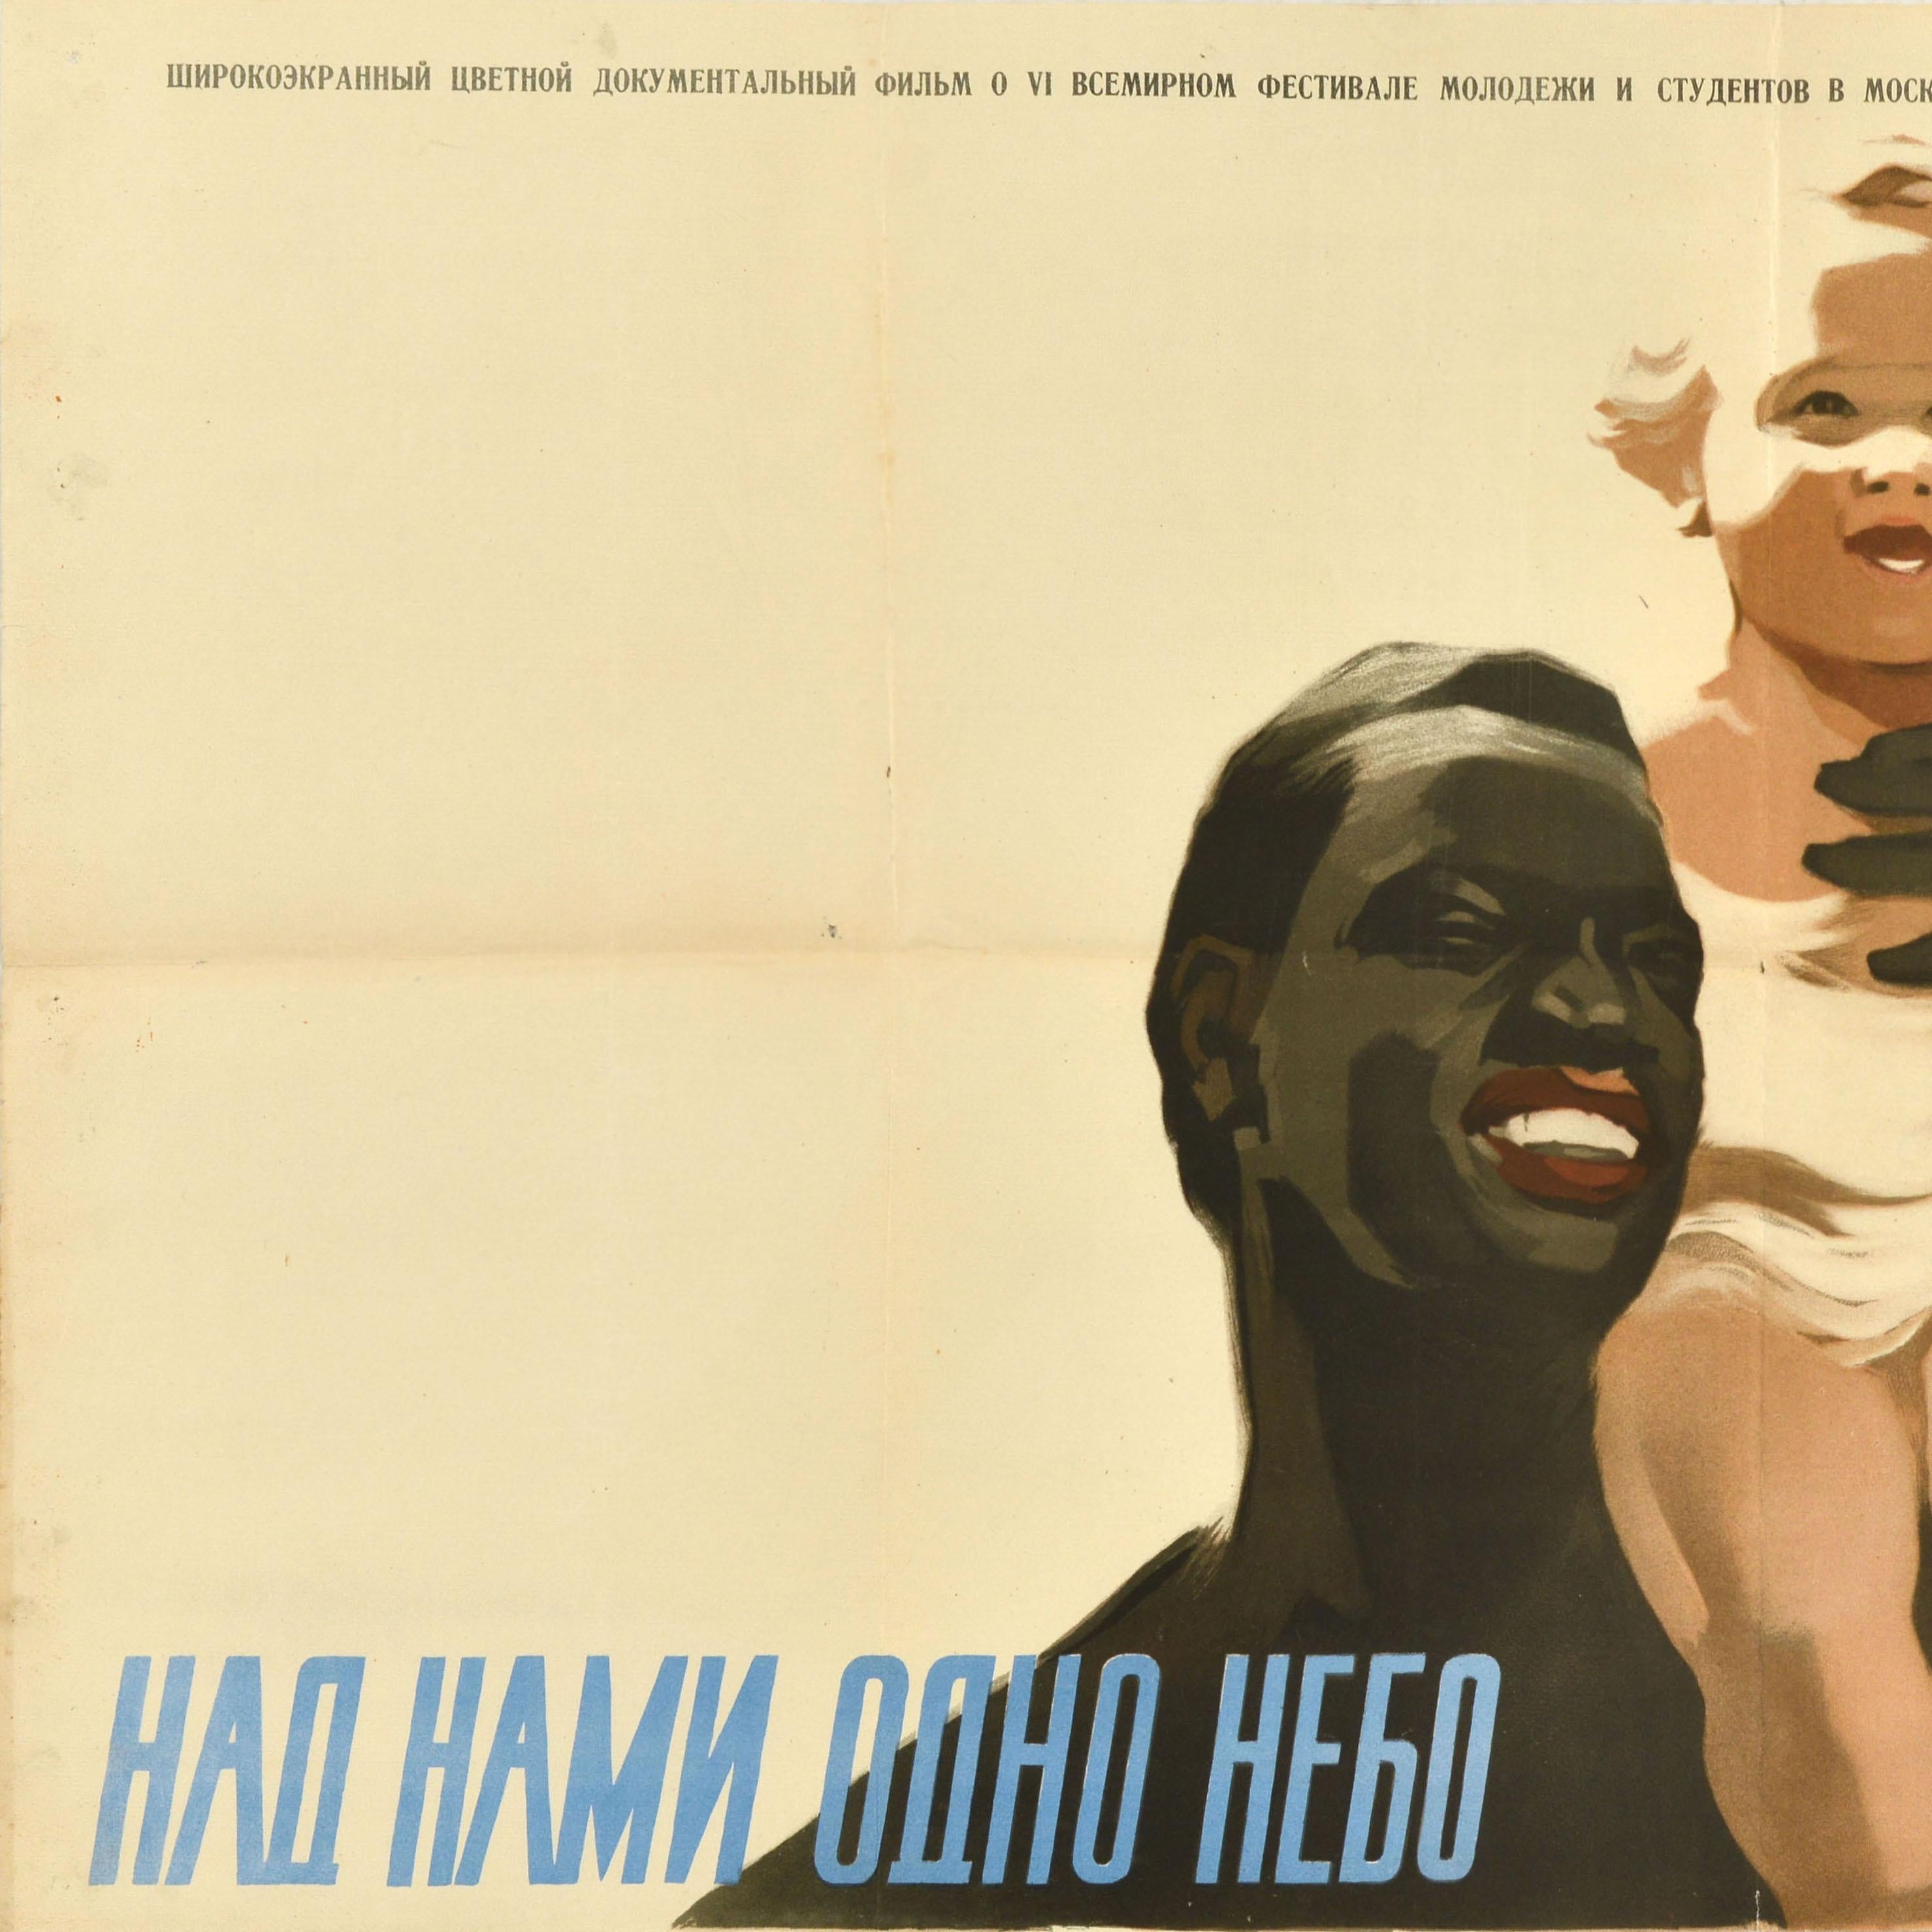 Original vintage Soviet cinema poster for a documentary film Above Us Only Sky portraying the events and people of the VI World Festival of Youth and Students in Moscow held from 28 July to 11 August 1957, featuring an image of a smiling man holding